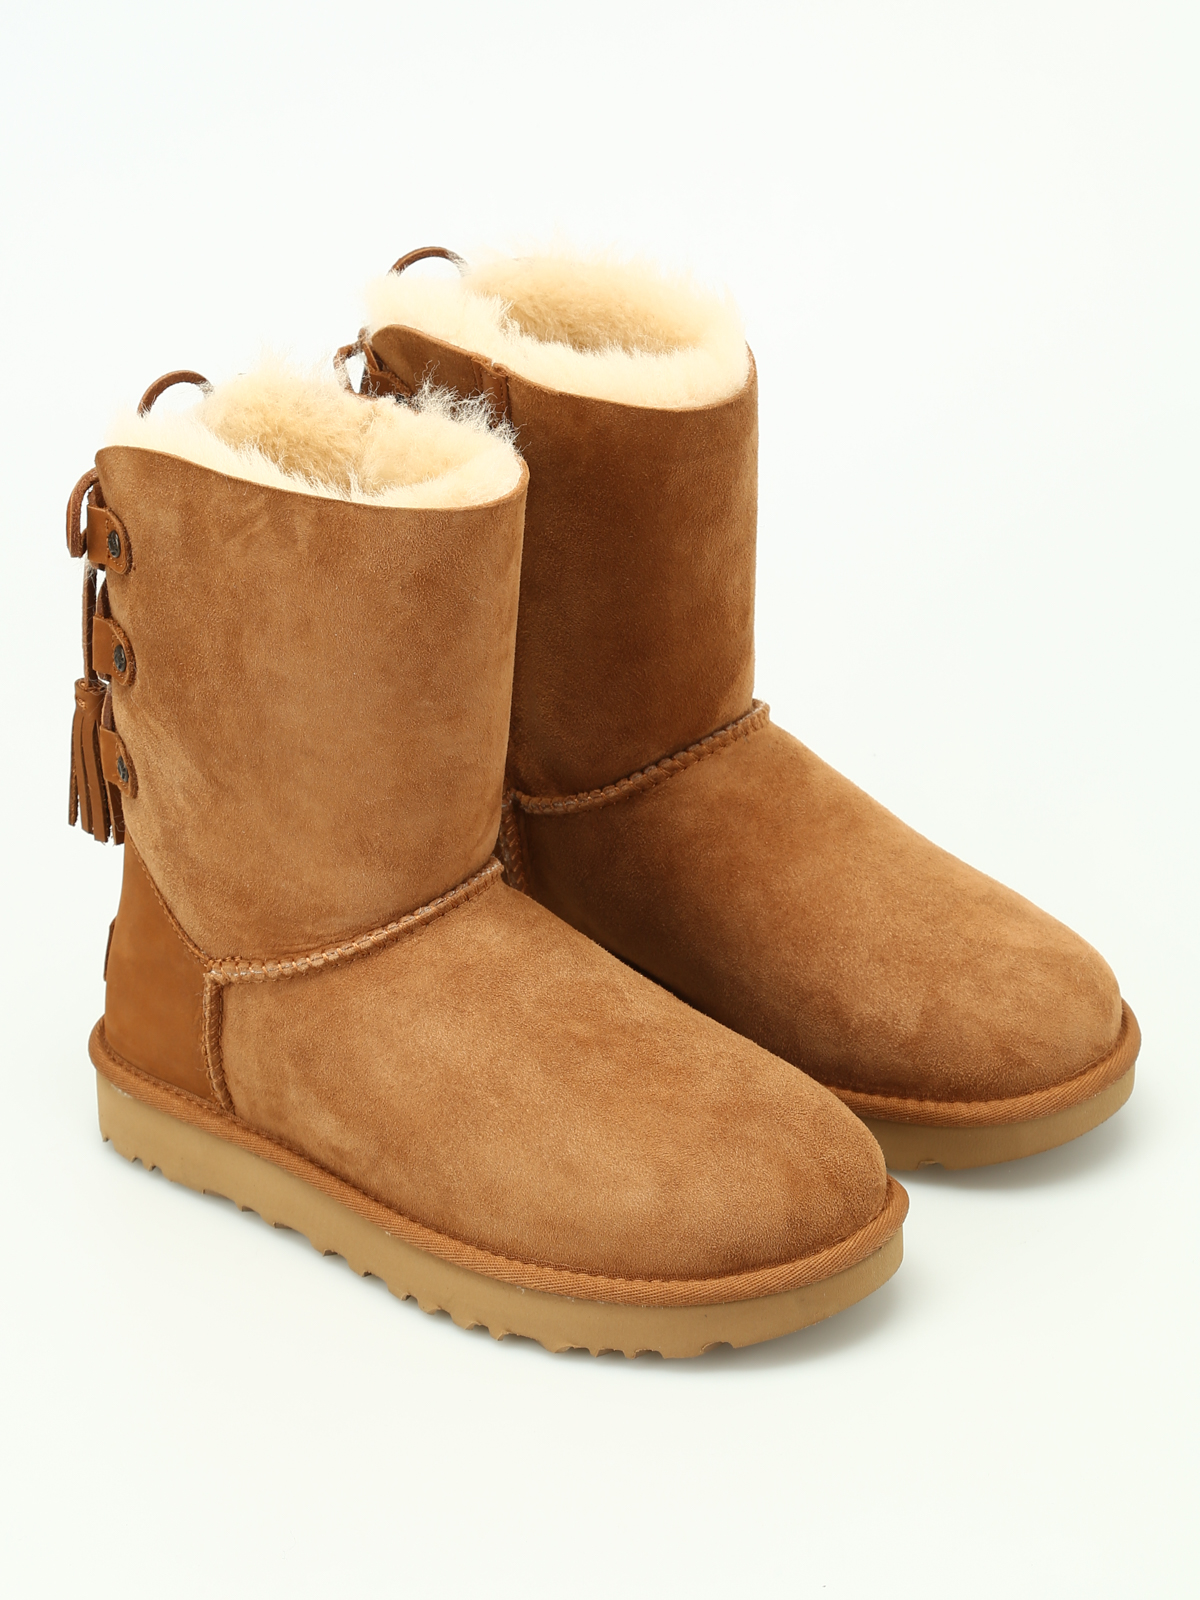 uggs with tassels